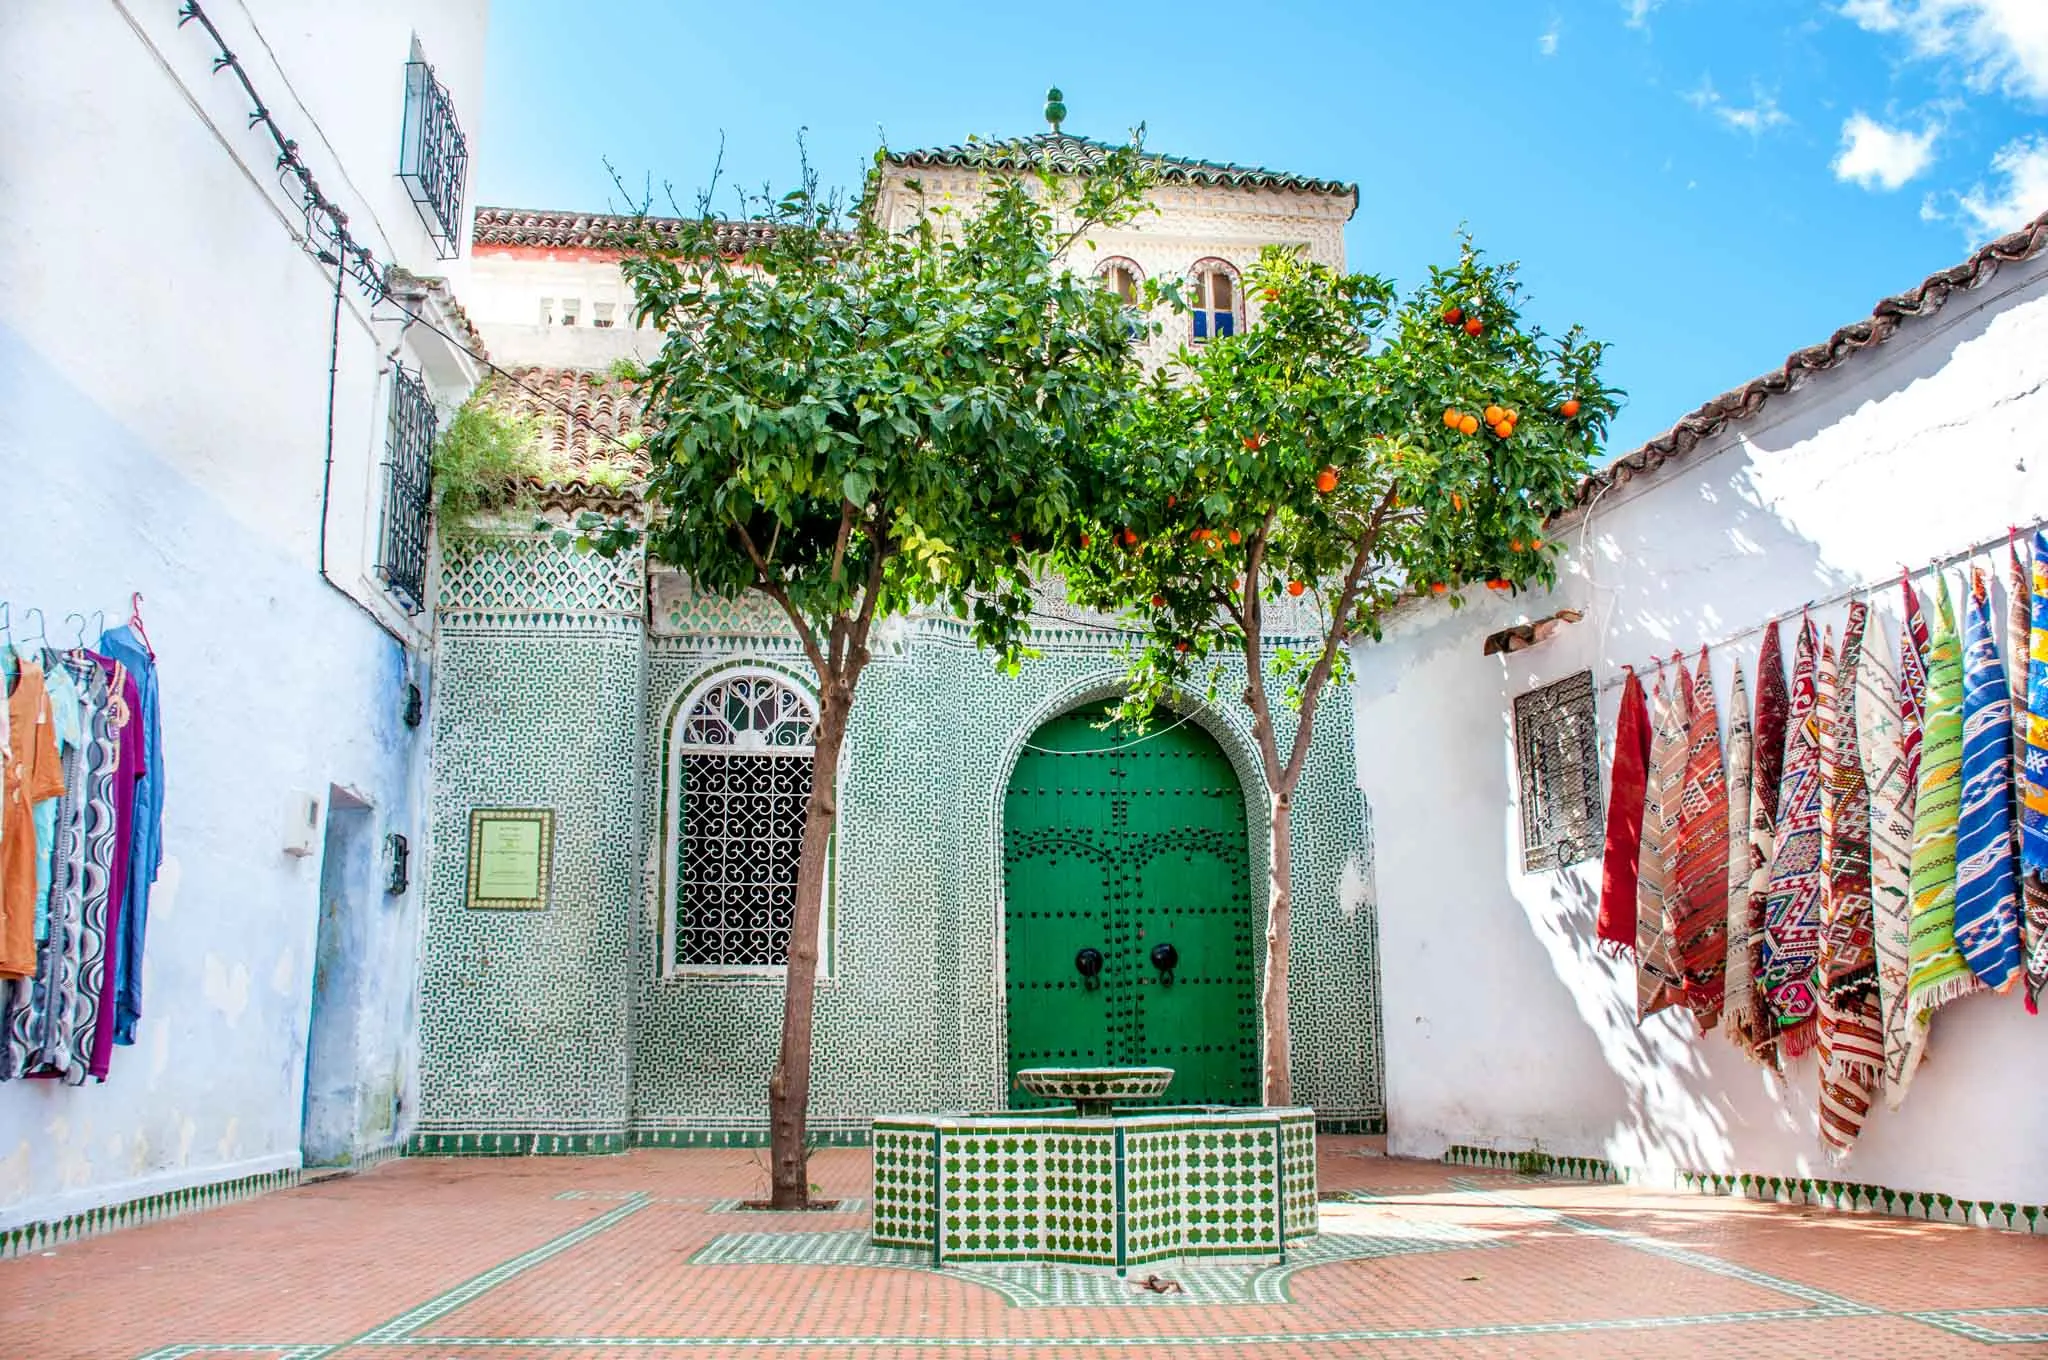 Green courtyard with orange trees.